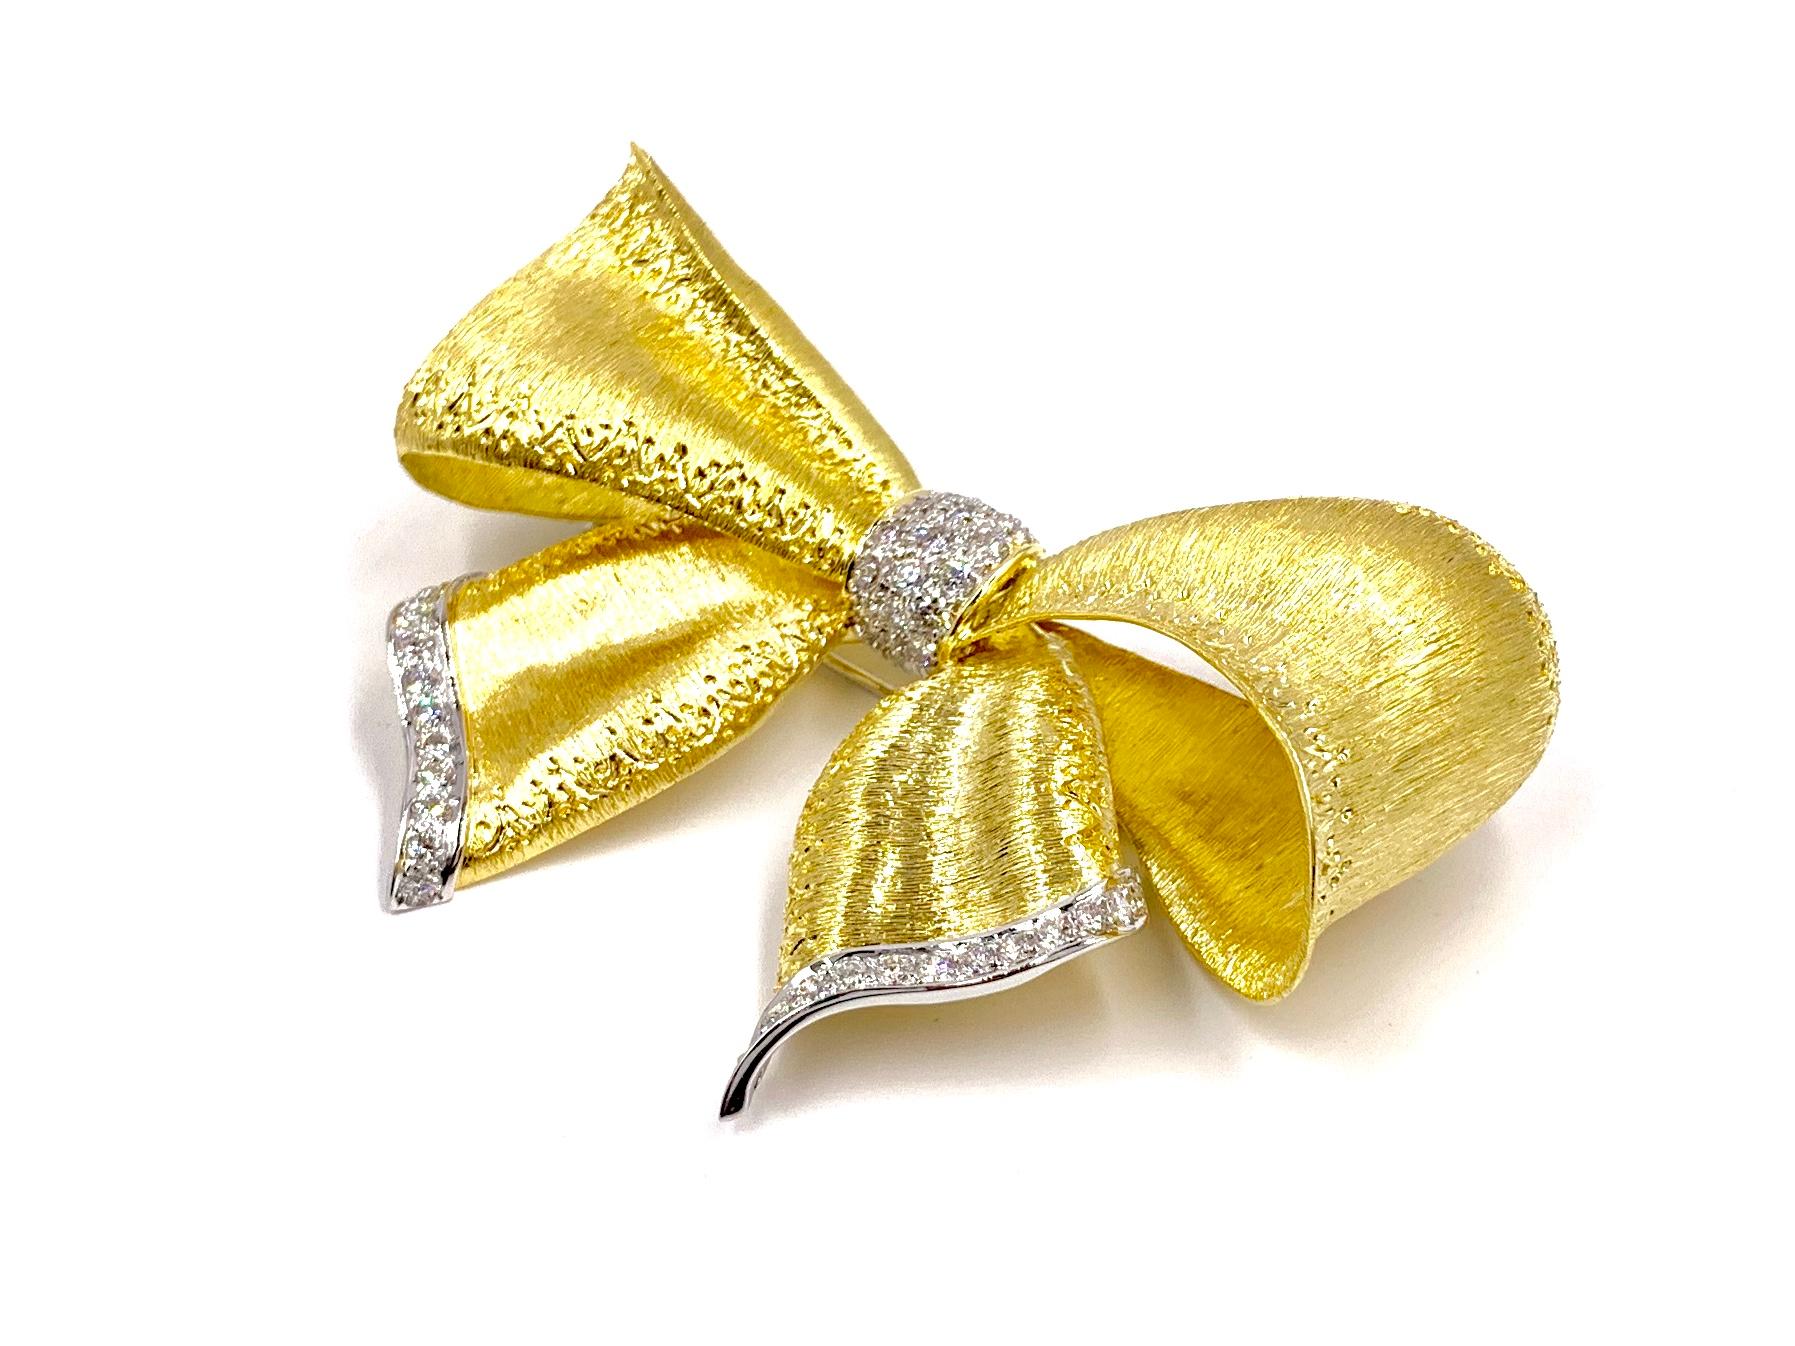 An elegant 18 karat yellow and white gold bow brooch with a gorgeous hand etched florentine finish and featuring 1.65 carats of bright white round brilliant diamonds. Diamond quality is approximately F color, VS2 clarity. Diamonds are set in white